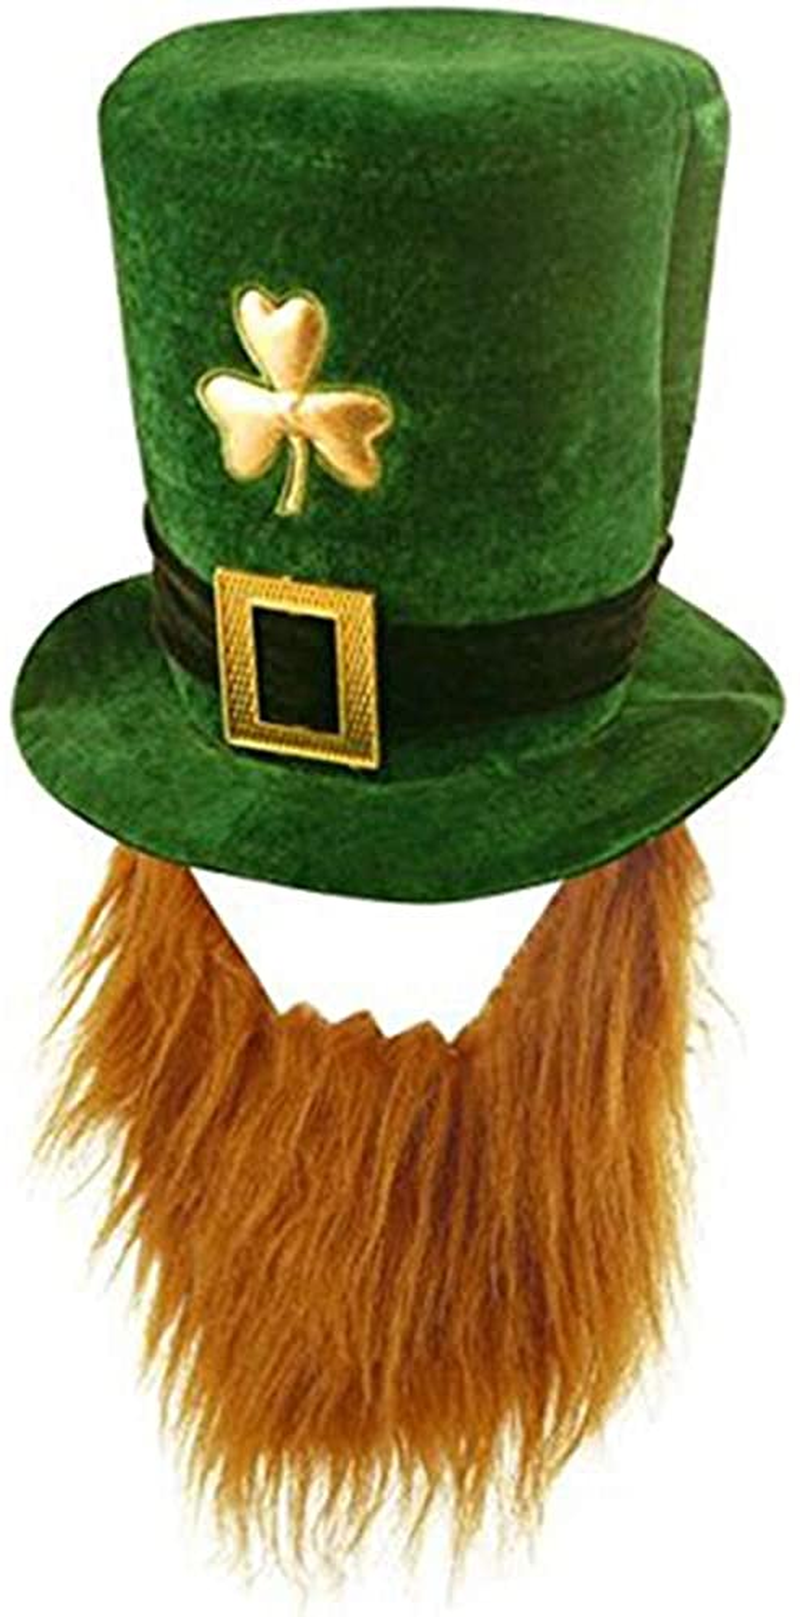 St. Patricks Day Costume Green Leprechaun Top Hat with Brown Beard Saint Patricks Day Shamrock Party Favor Decorations (Top Hat with Beard 2020)